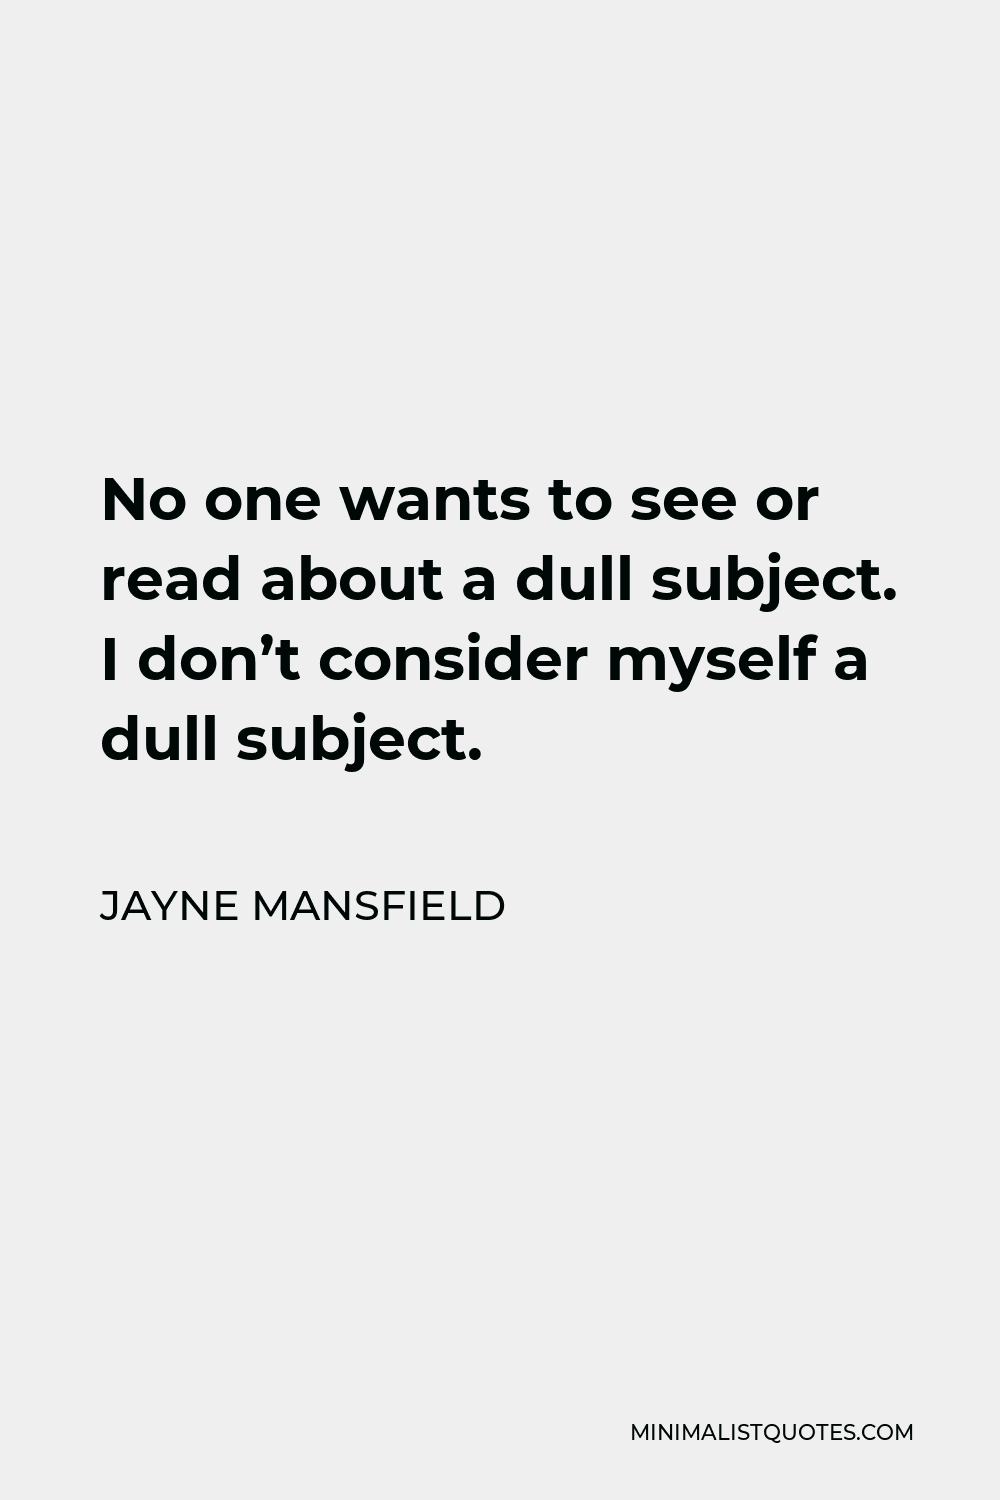 Jayne Mansfield Quote - No one wants to see or read about a dull subject. I don’t consider myself a dull subject.